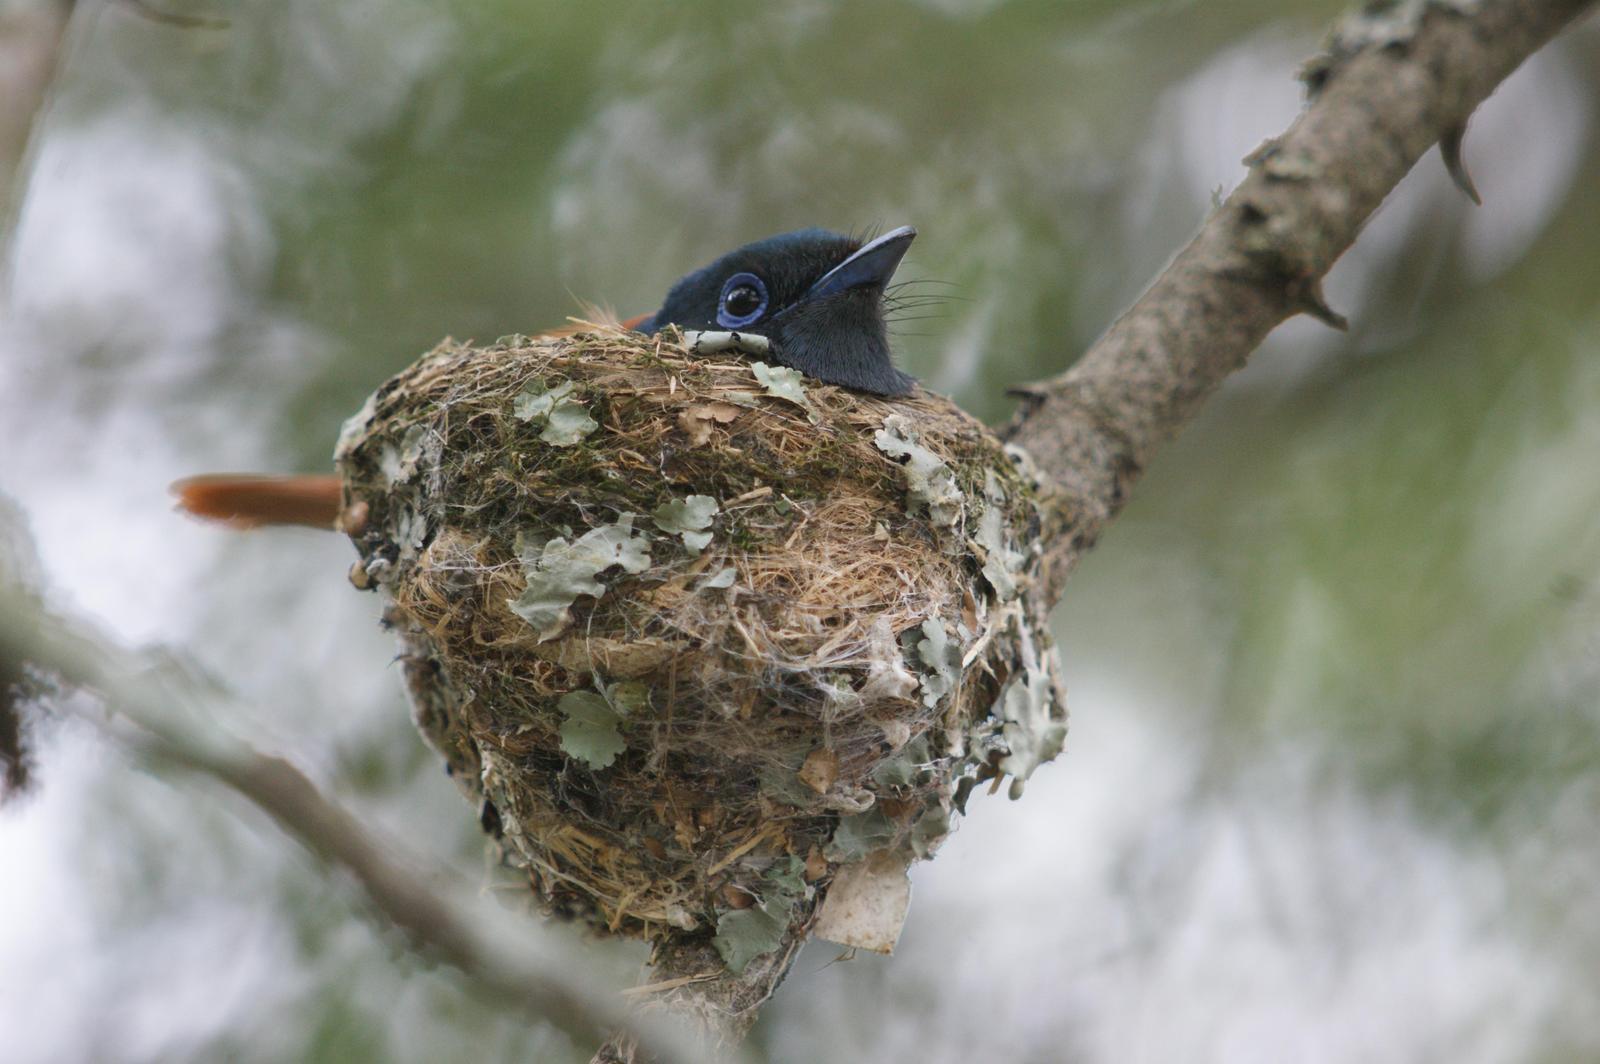 African Paradise-Flycatcher Photo by Ethan Kistler